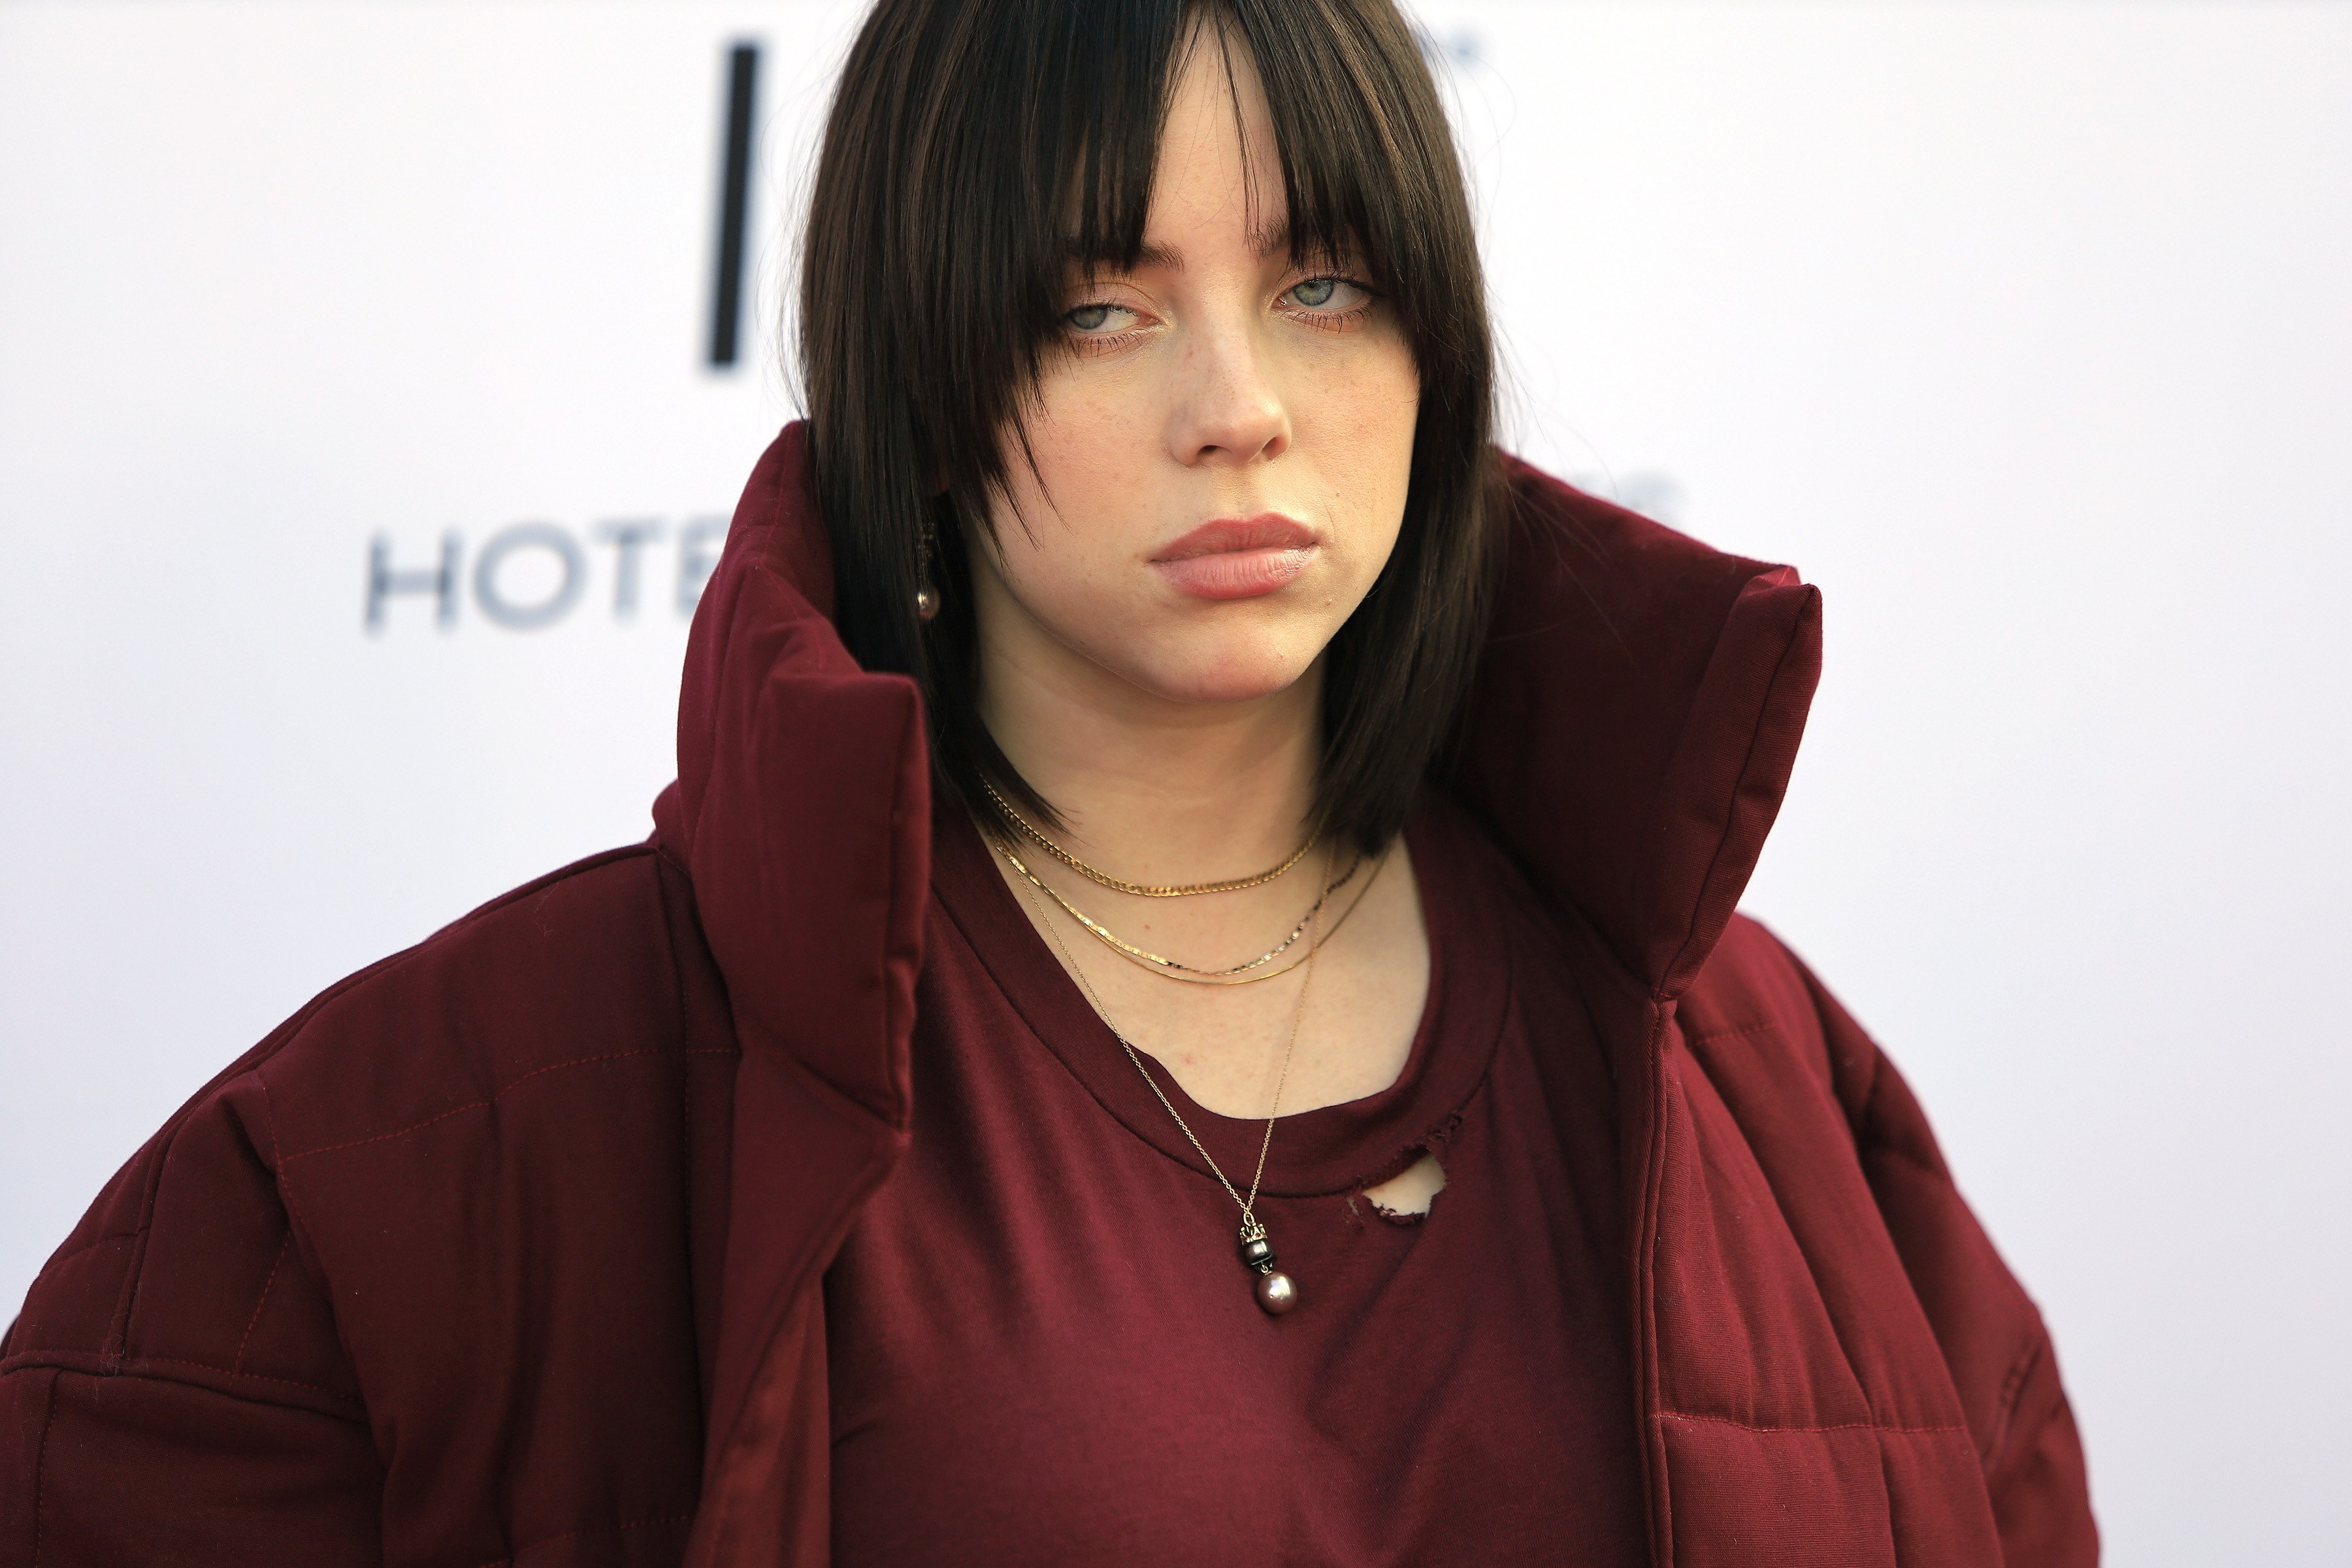 American singer Billie Eilish recently revealed that early exposure to pornography negatively impacted her mental health and personal relationships. Photo: EPA-EFE